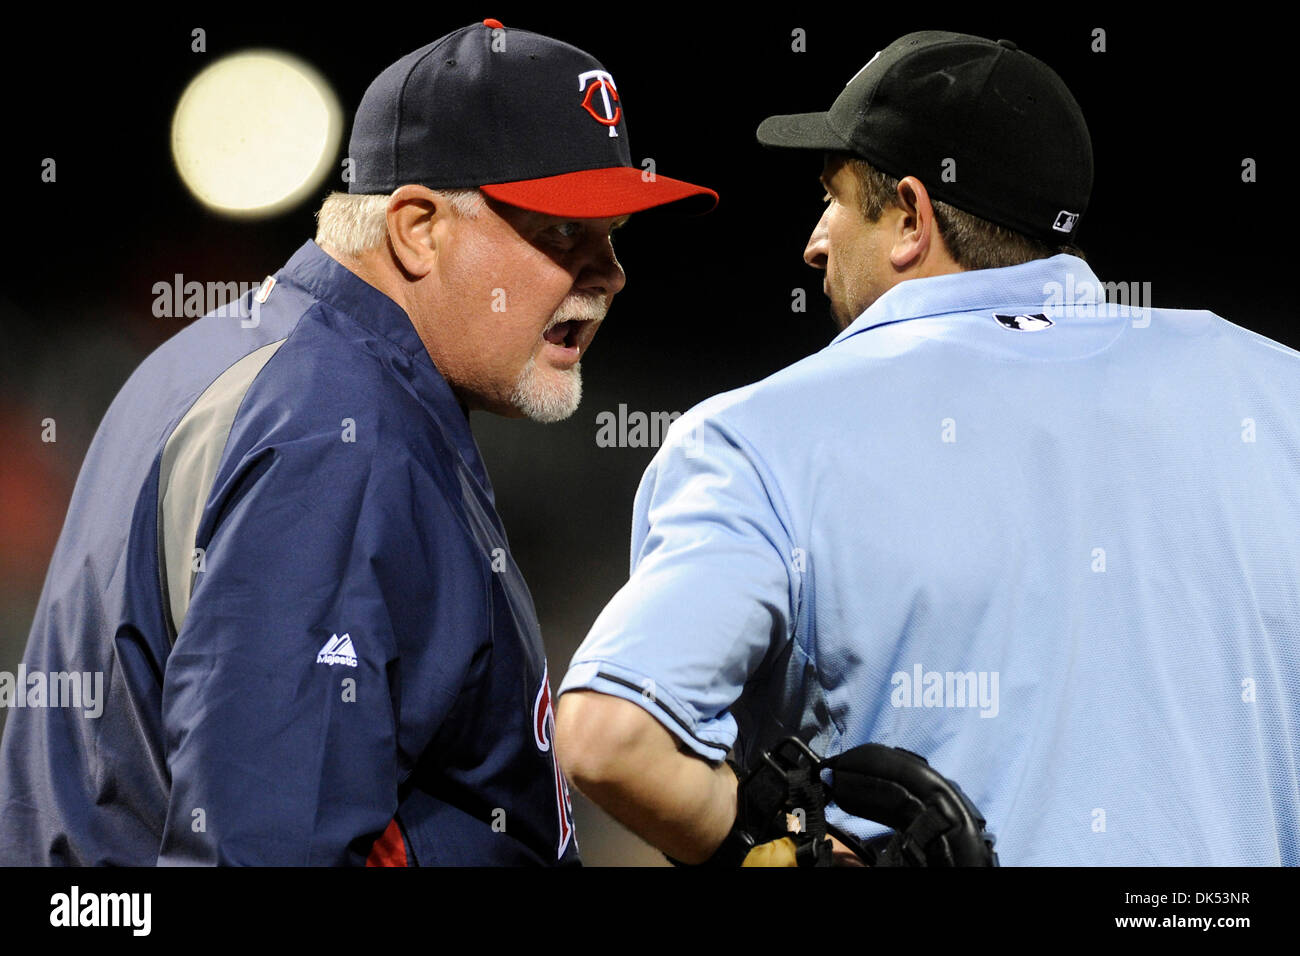 Apr. 18, 2011 - Baltimore, Maryland, U.S - Minnesota Twins manager Ron Gardenhire (left) argues with home plate umpire Chris Guccione (right)during a game between the Baltimore Orioles and the Minnesota Twins, the Twins defeated the Orioles 5-3 (Credit Image: © TJ Root/Southcreek Global/ZUMApress.com) Stock Photo